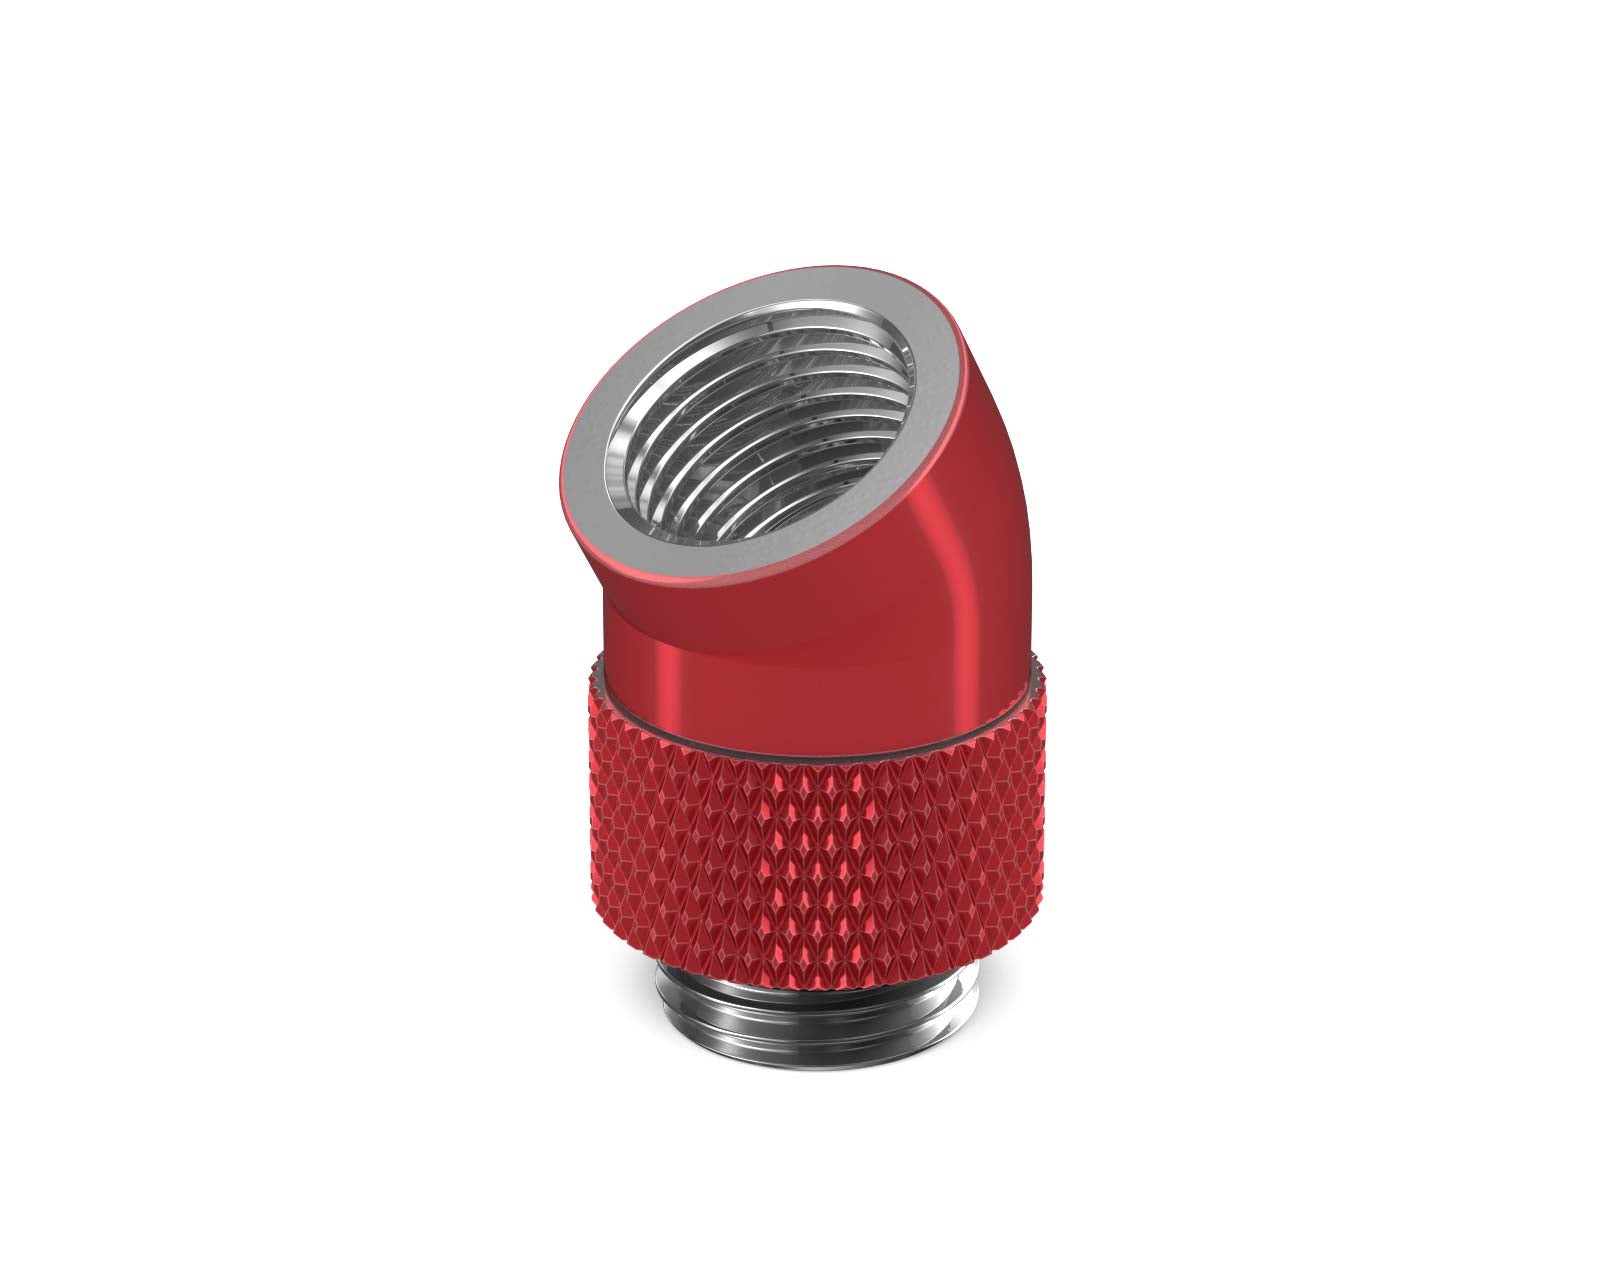 PrimoChill Male to Female G 1/4in. 30 Degree SX Rotary Elbow Fitting - PrimoChill - KEEPING IT COOL Candy Red